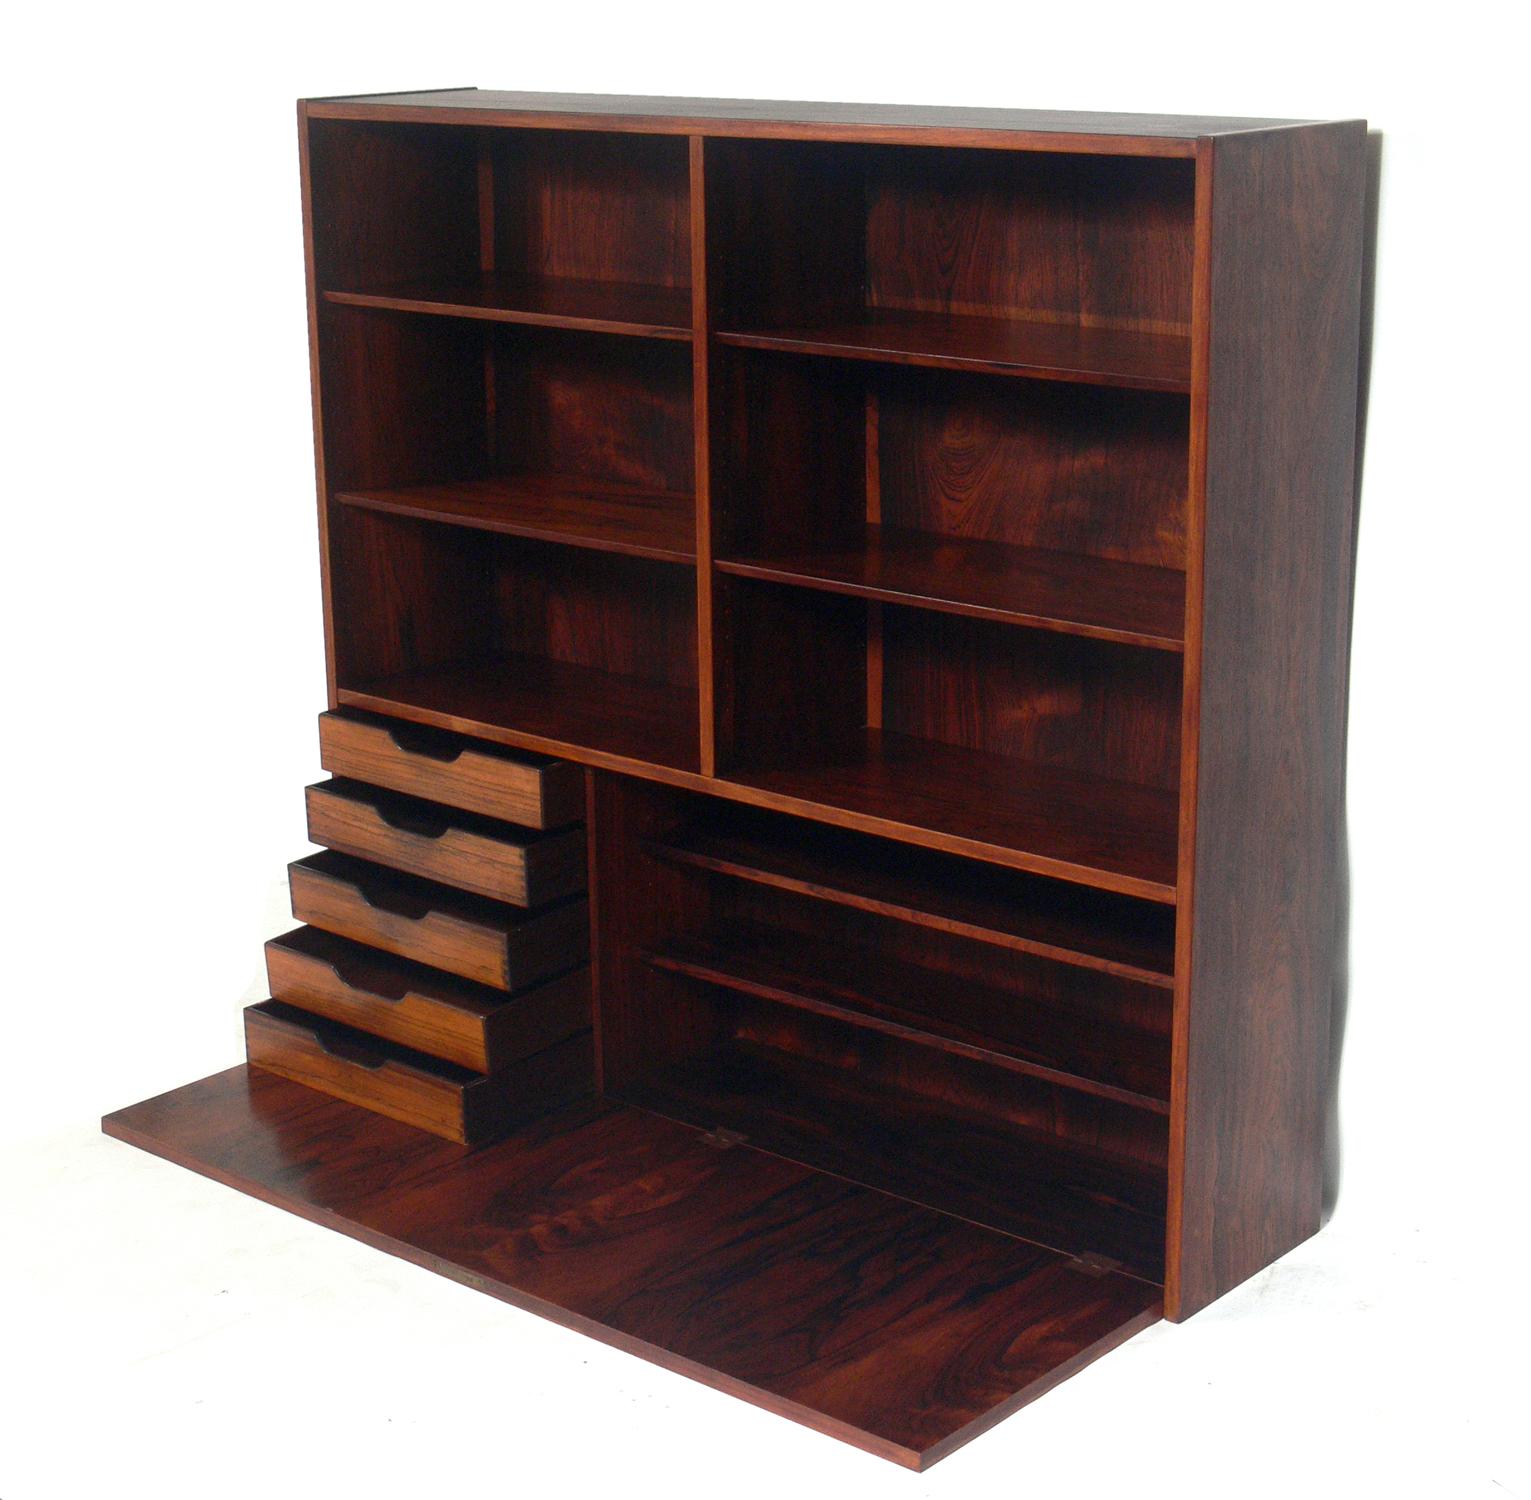 French Danish Modern Rosewood Bookcase by Poul Hundevad